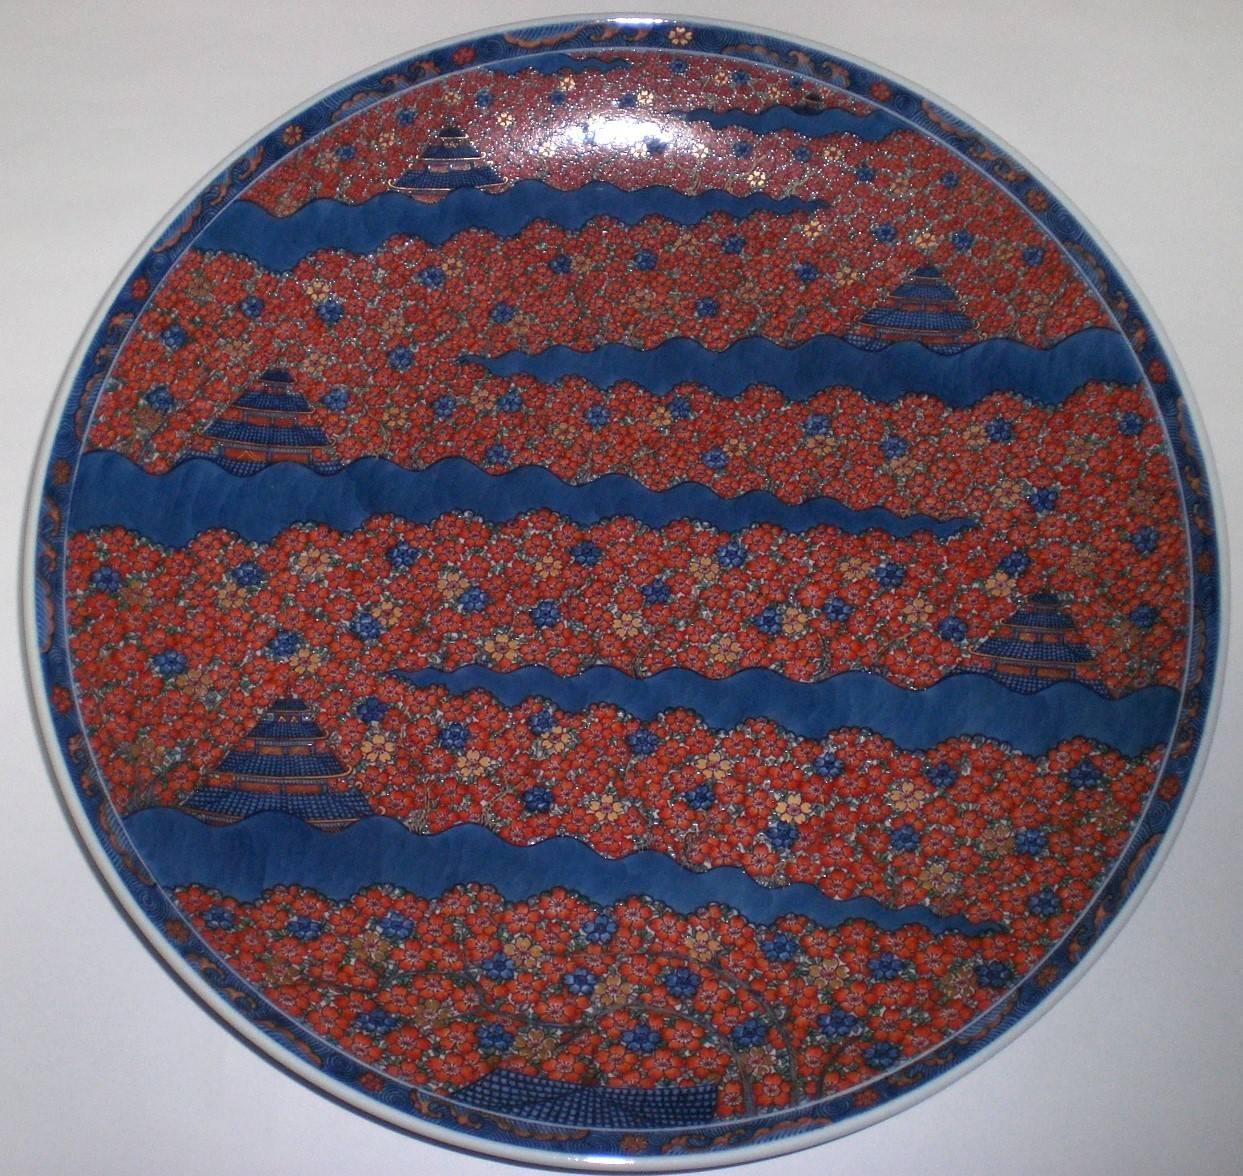 Japanese Imari Porcelain Charger by Master Artist (1931-2009), in Red and Blue 6